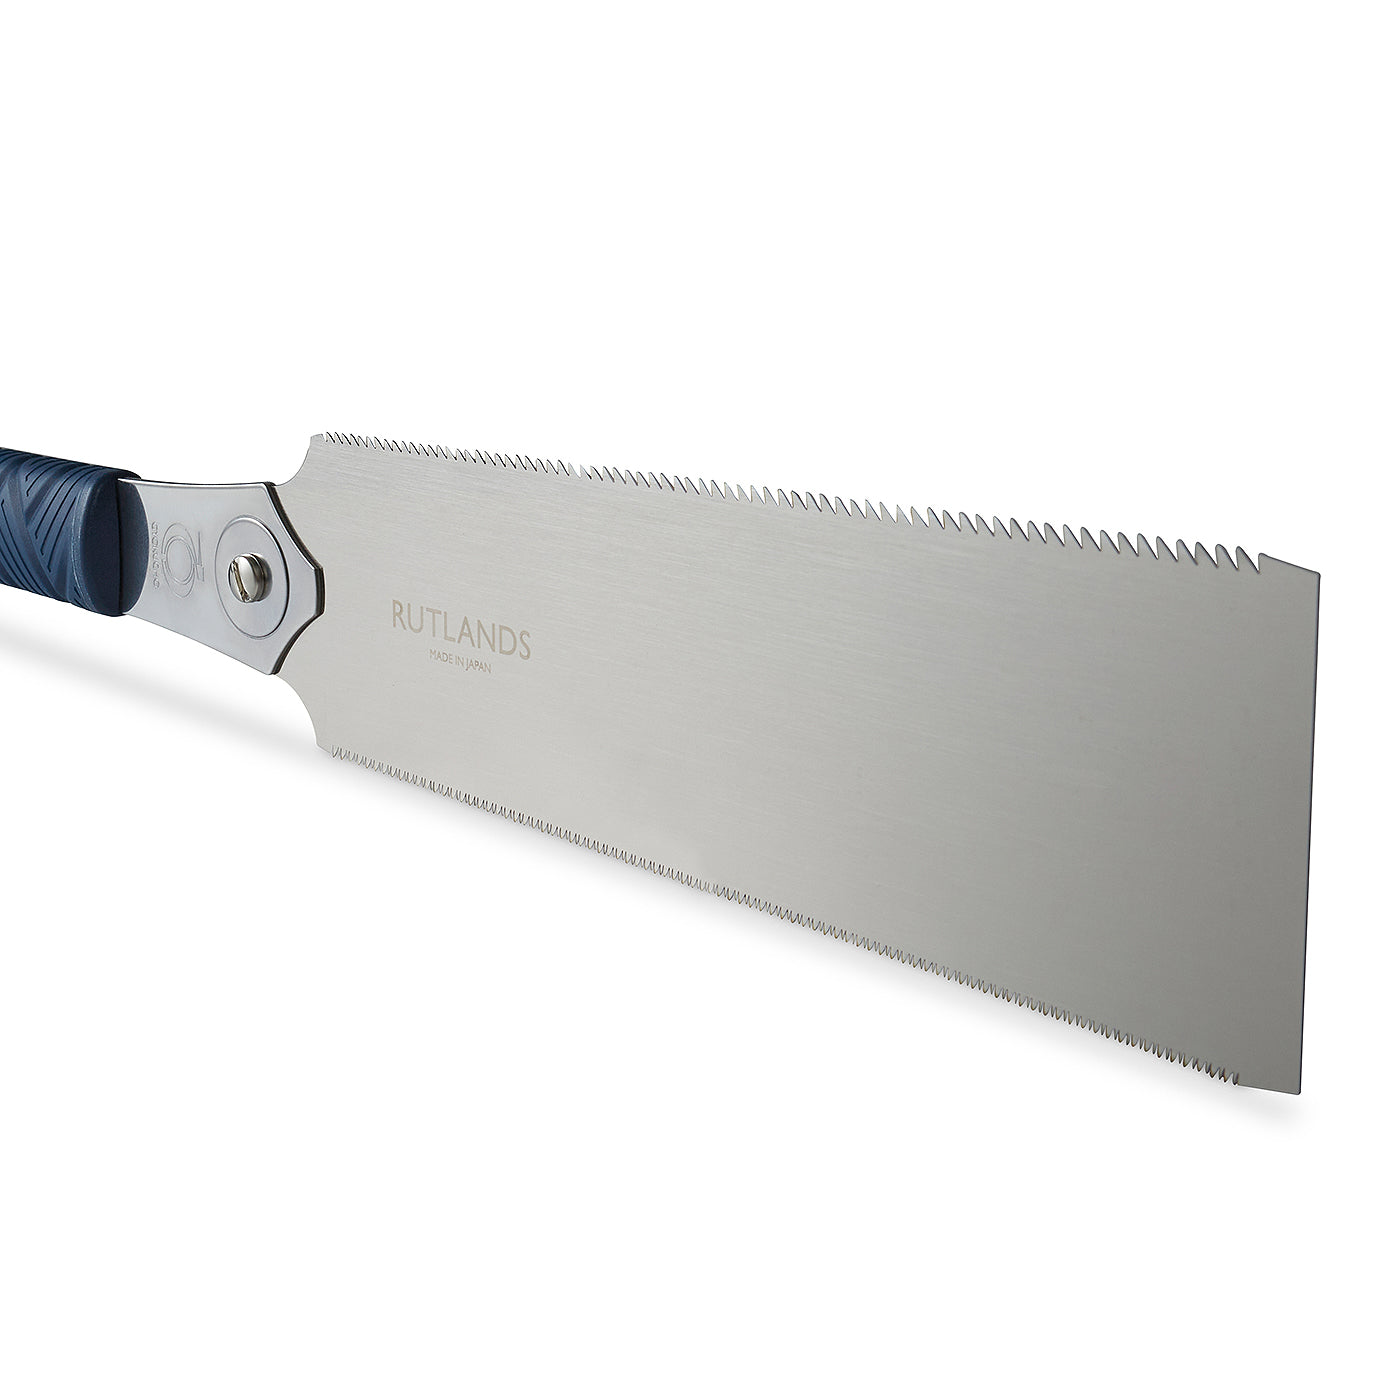 Japanese Ryoba Saws | Next Day Delivery – Rutlands Limited